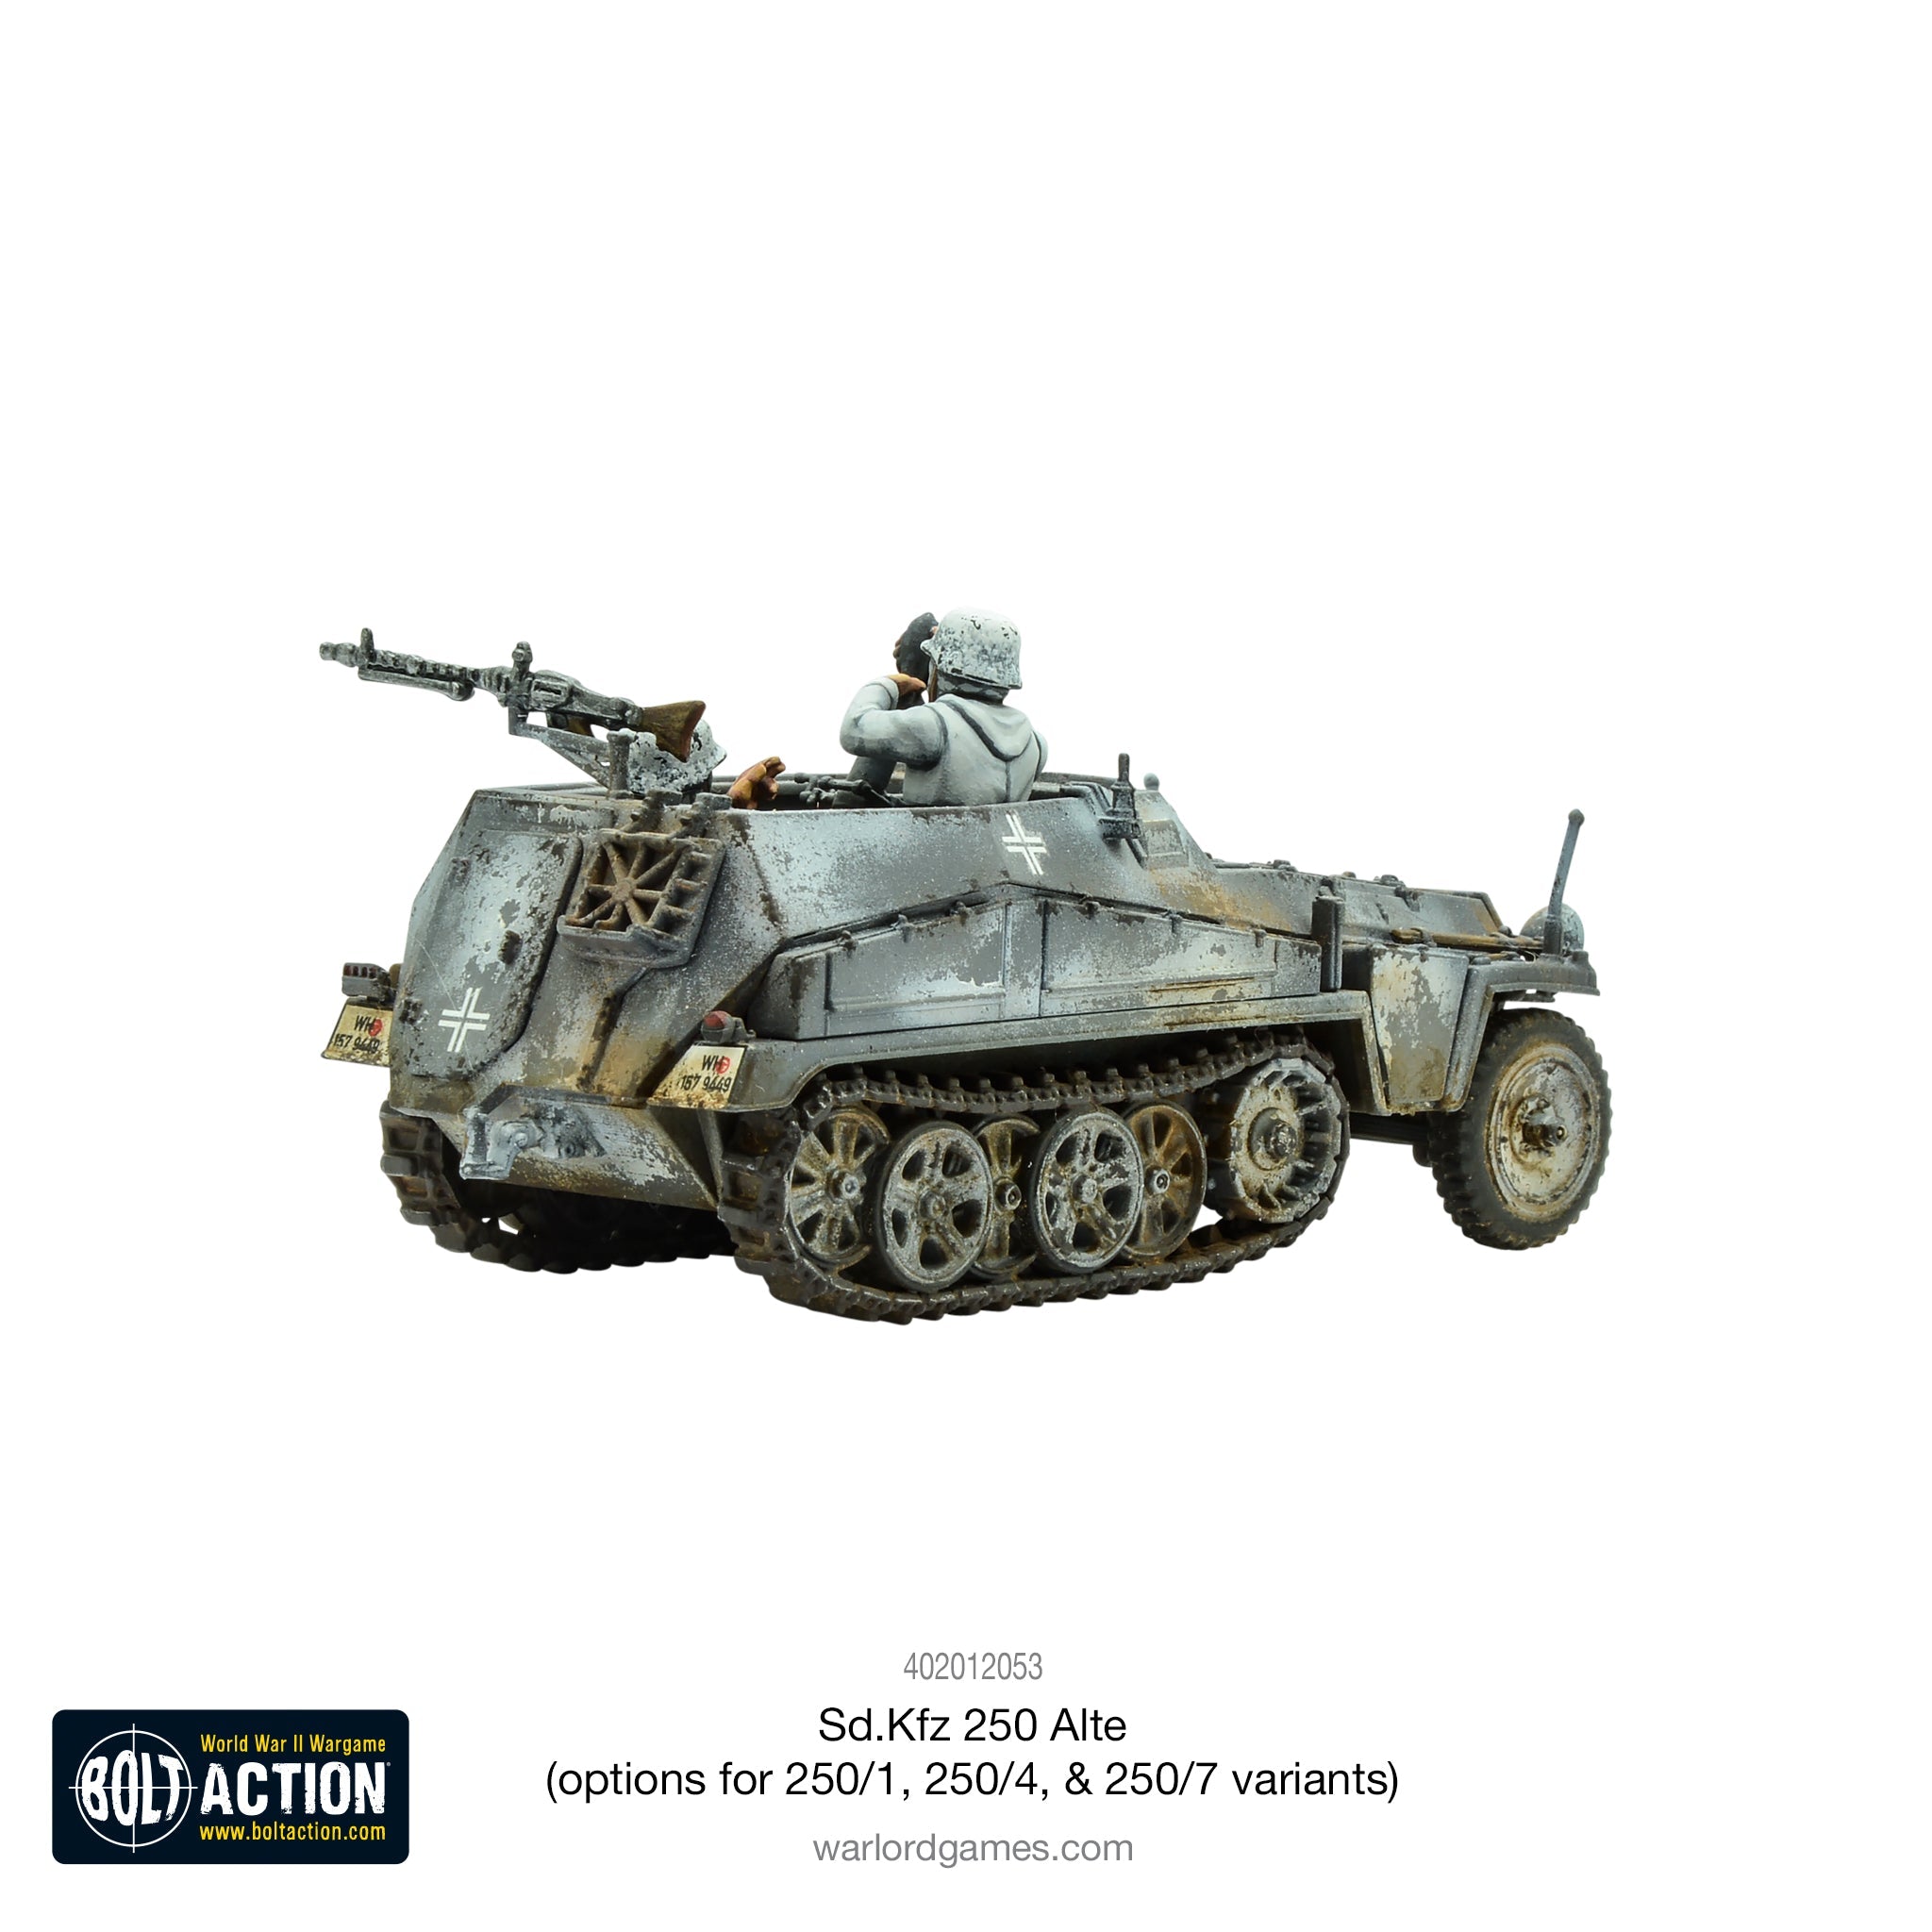 Sd.Kfz 250 Alte (Options for 250/1, 250/4 & 250/7)